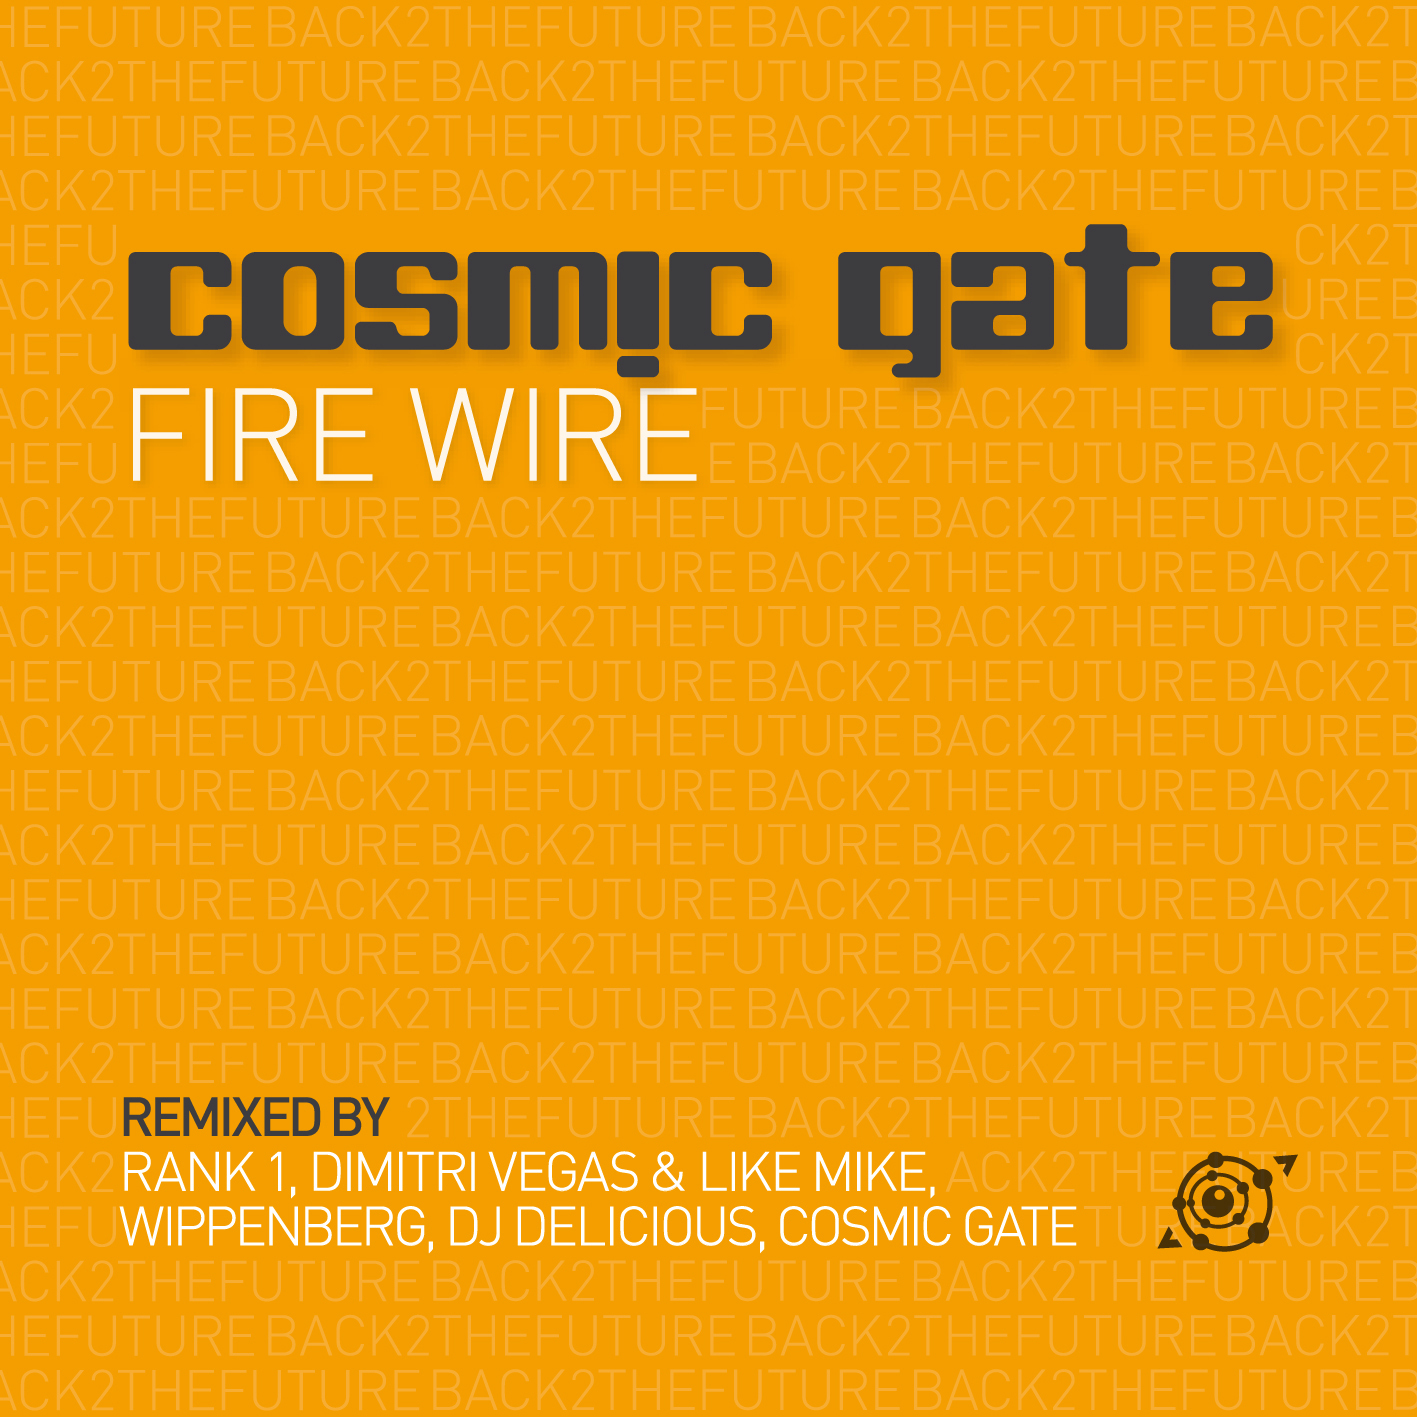 Fire Wire (Cosmic Gates Back 2 The Future Remix)